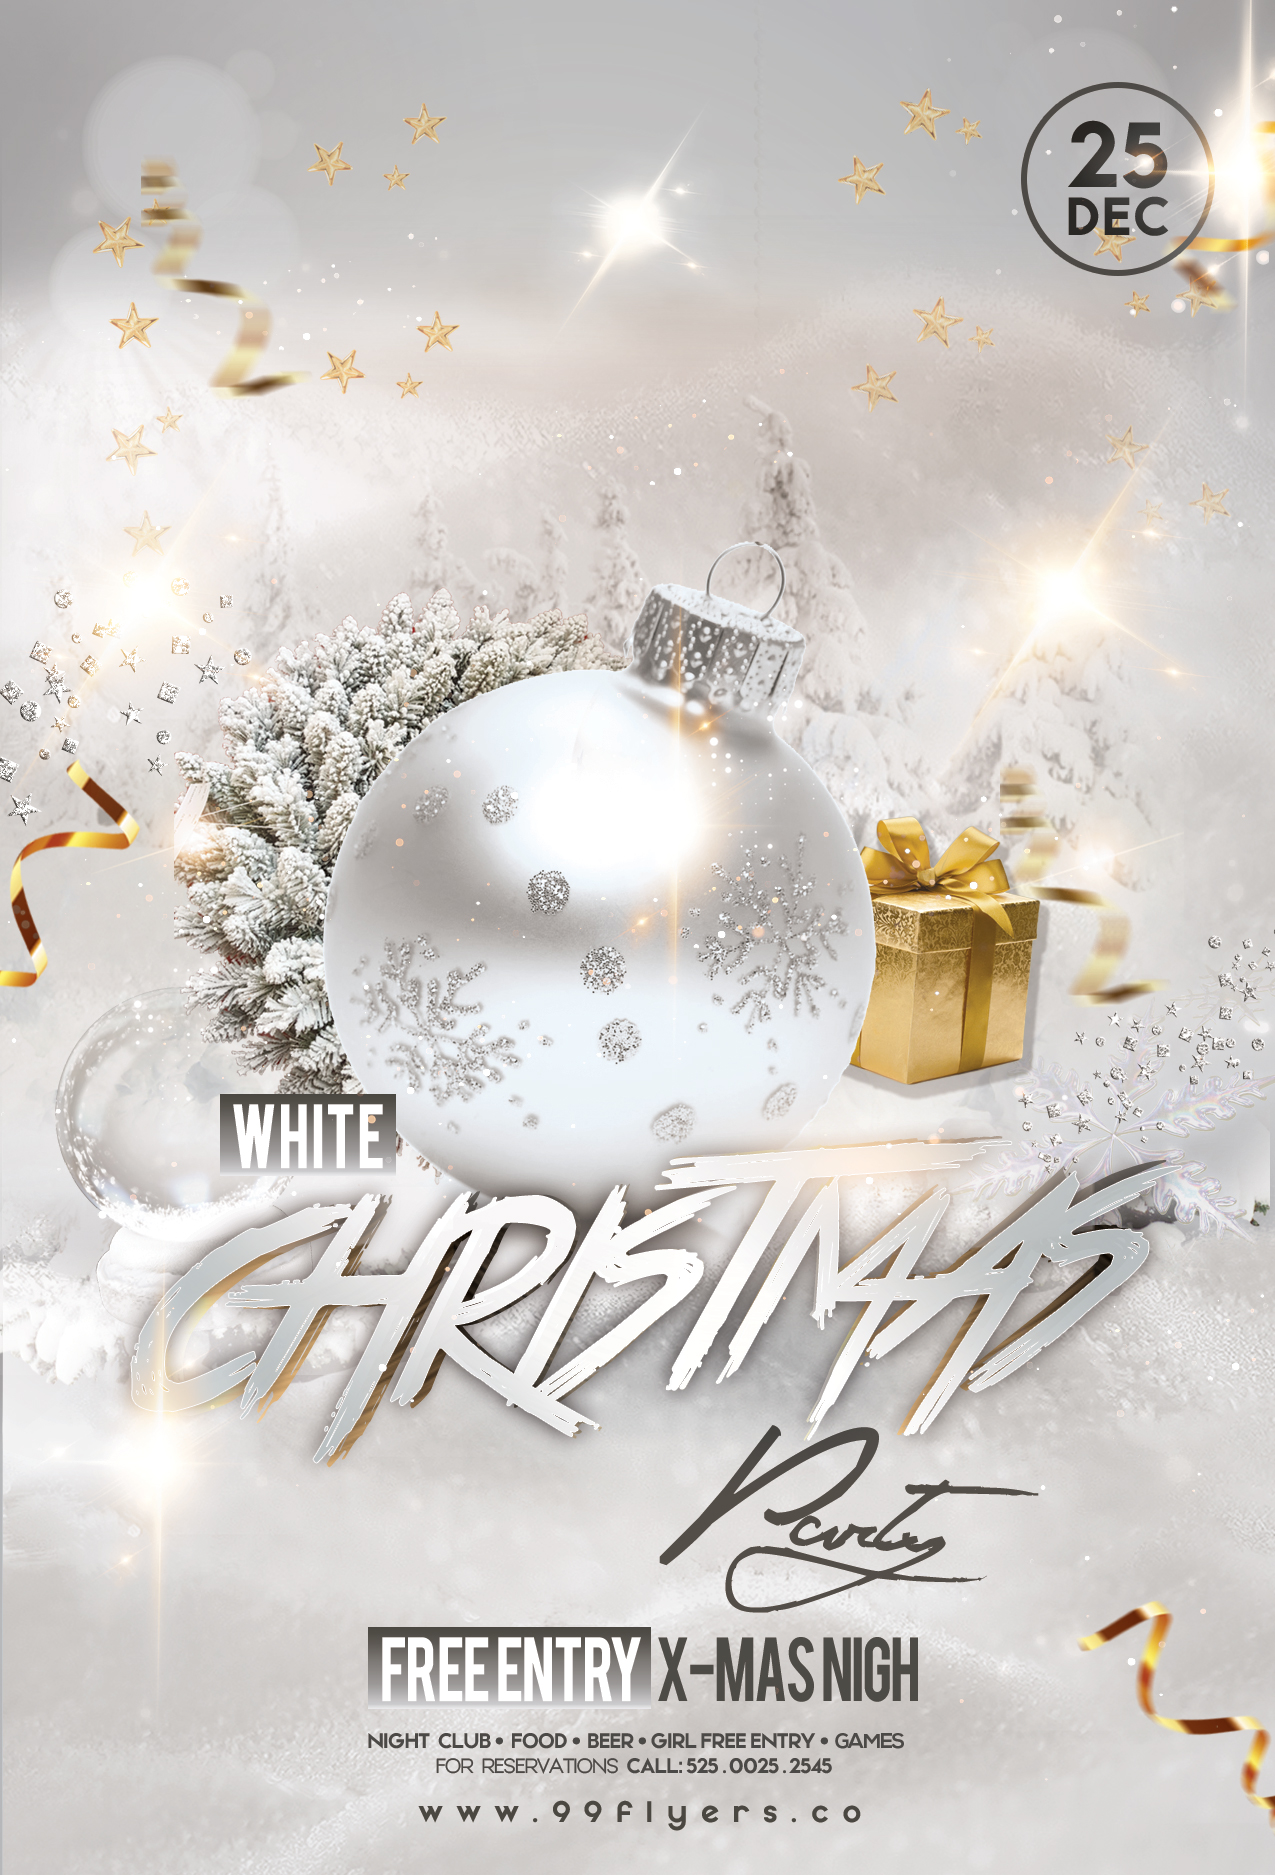 White Christmas Party Free PSD Flyer Template by 99flyers on DeviantArt